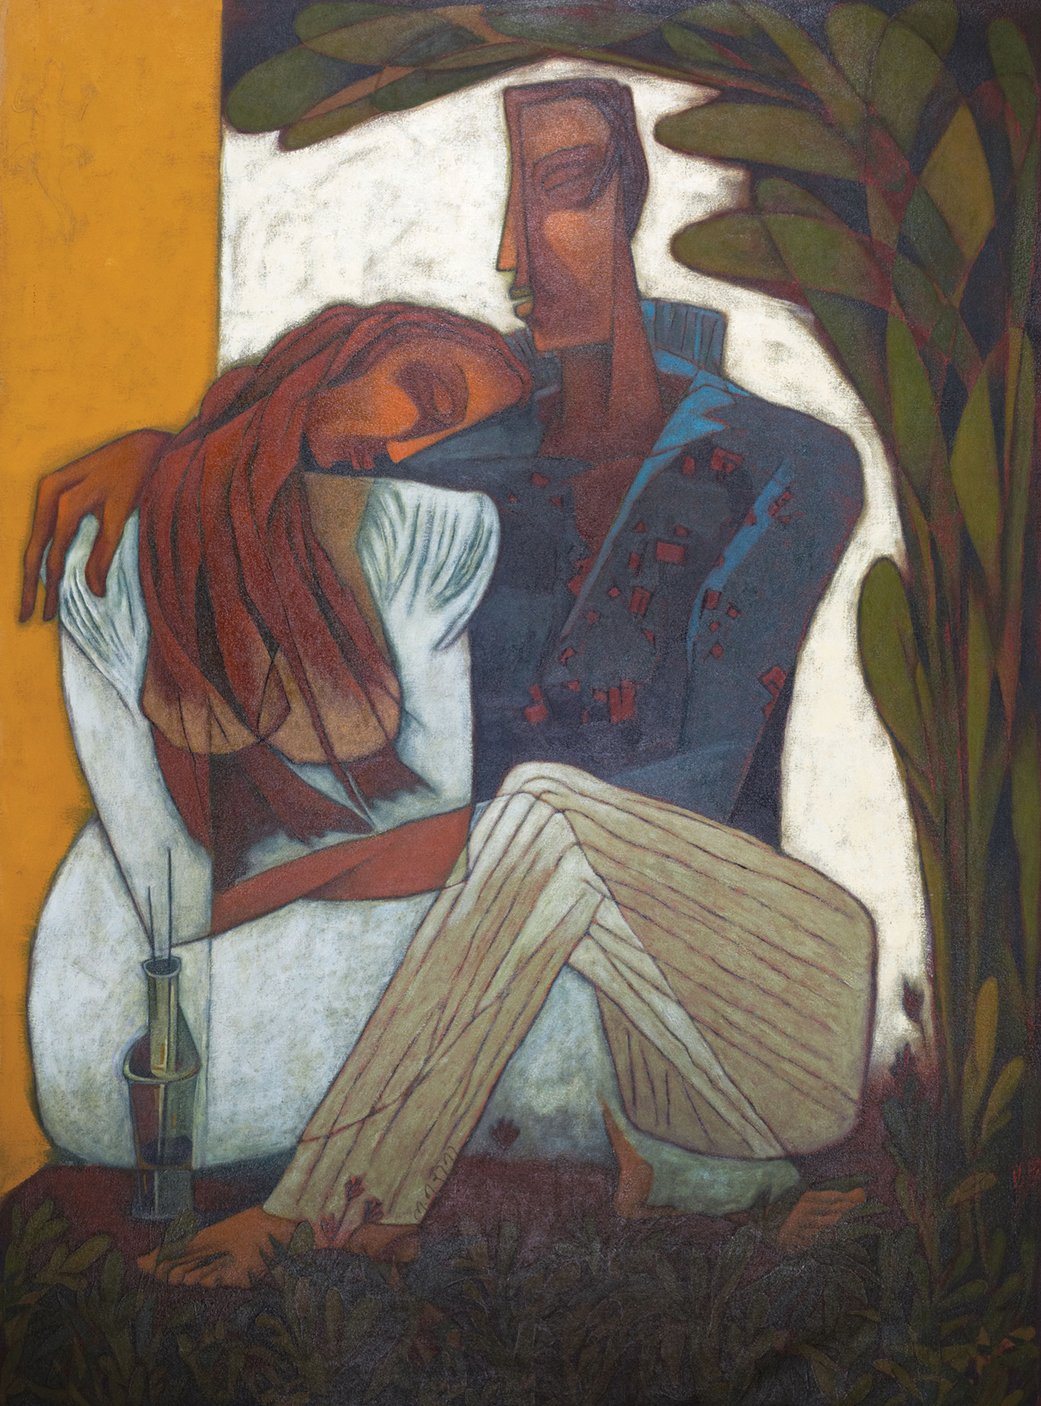 Lovers|L.N. Rana- Oil on Canvas, 2010, 44 x 32 inches